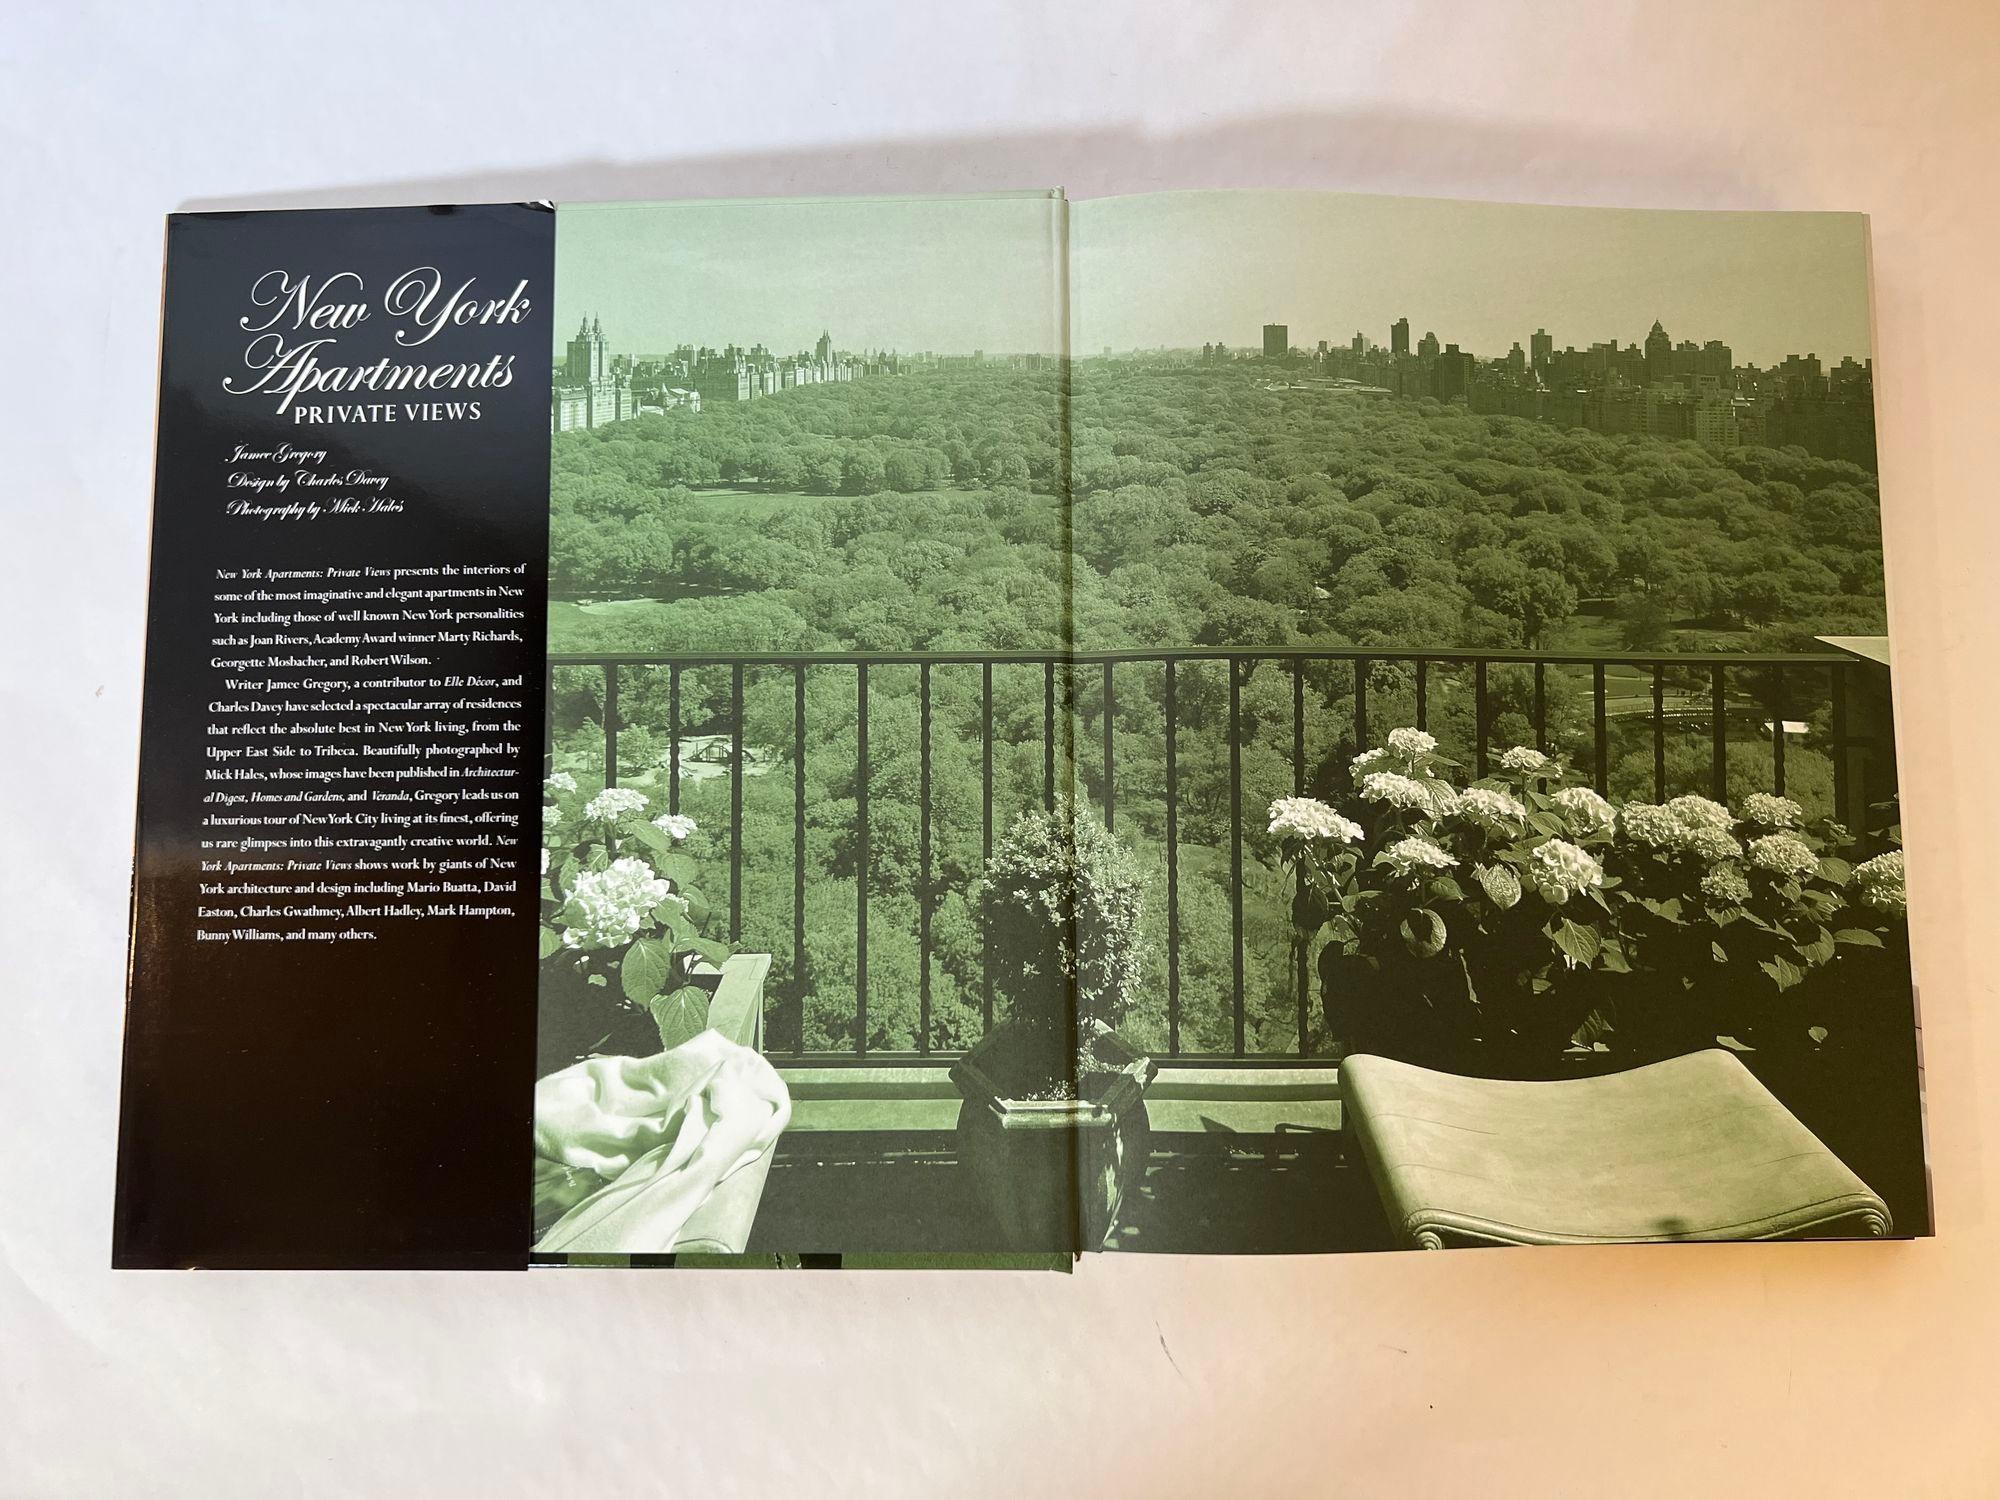 American Classical New York Apartments: Private Views By Jamee Gregory Hardcover 2004 For Sale